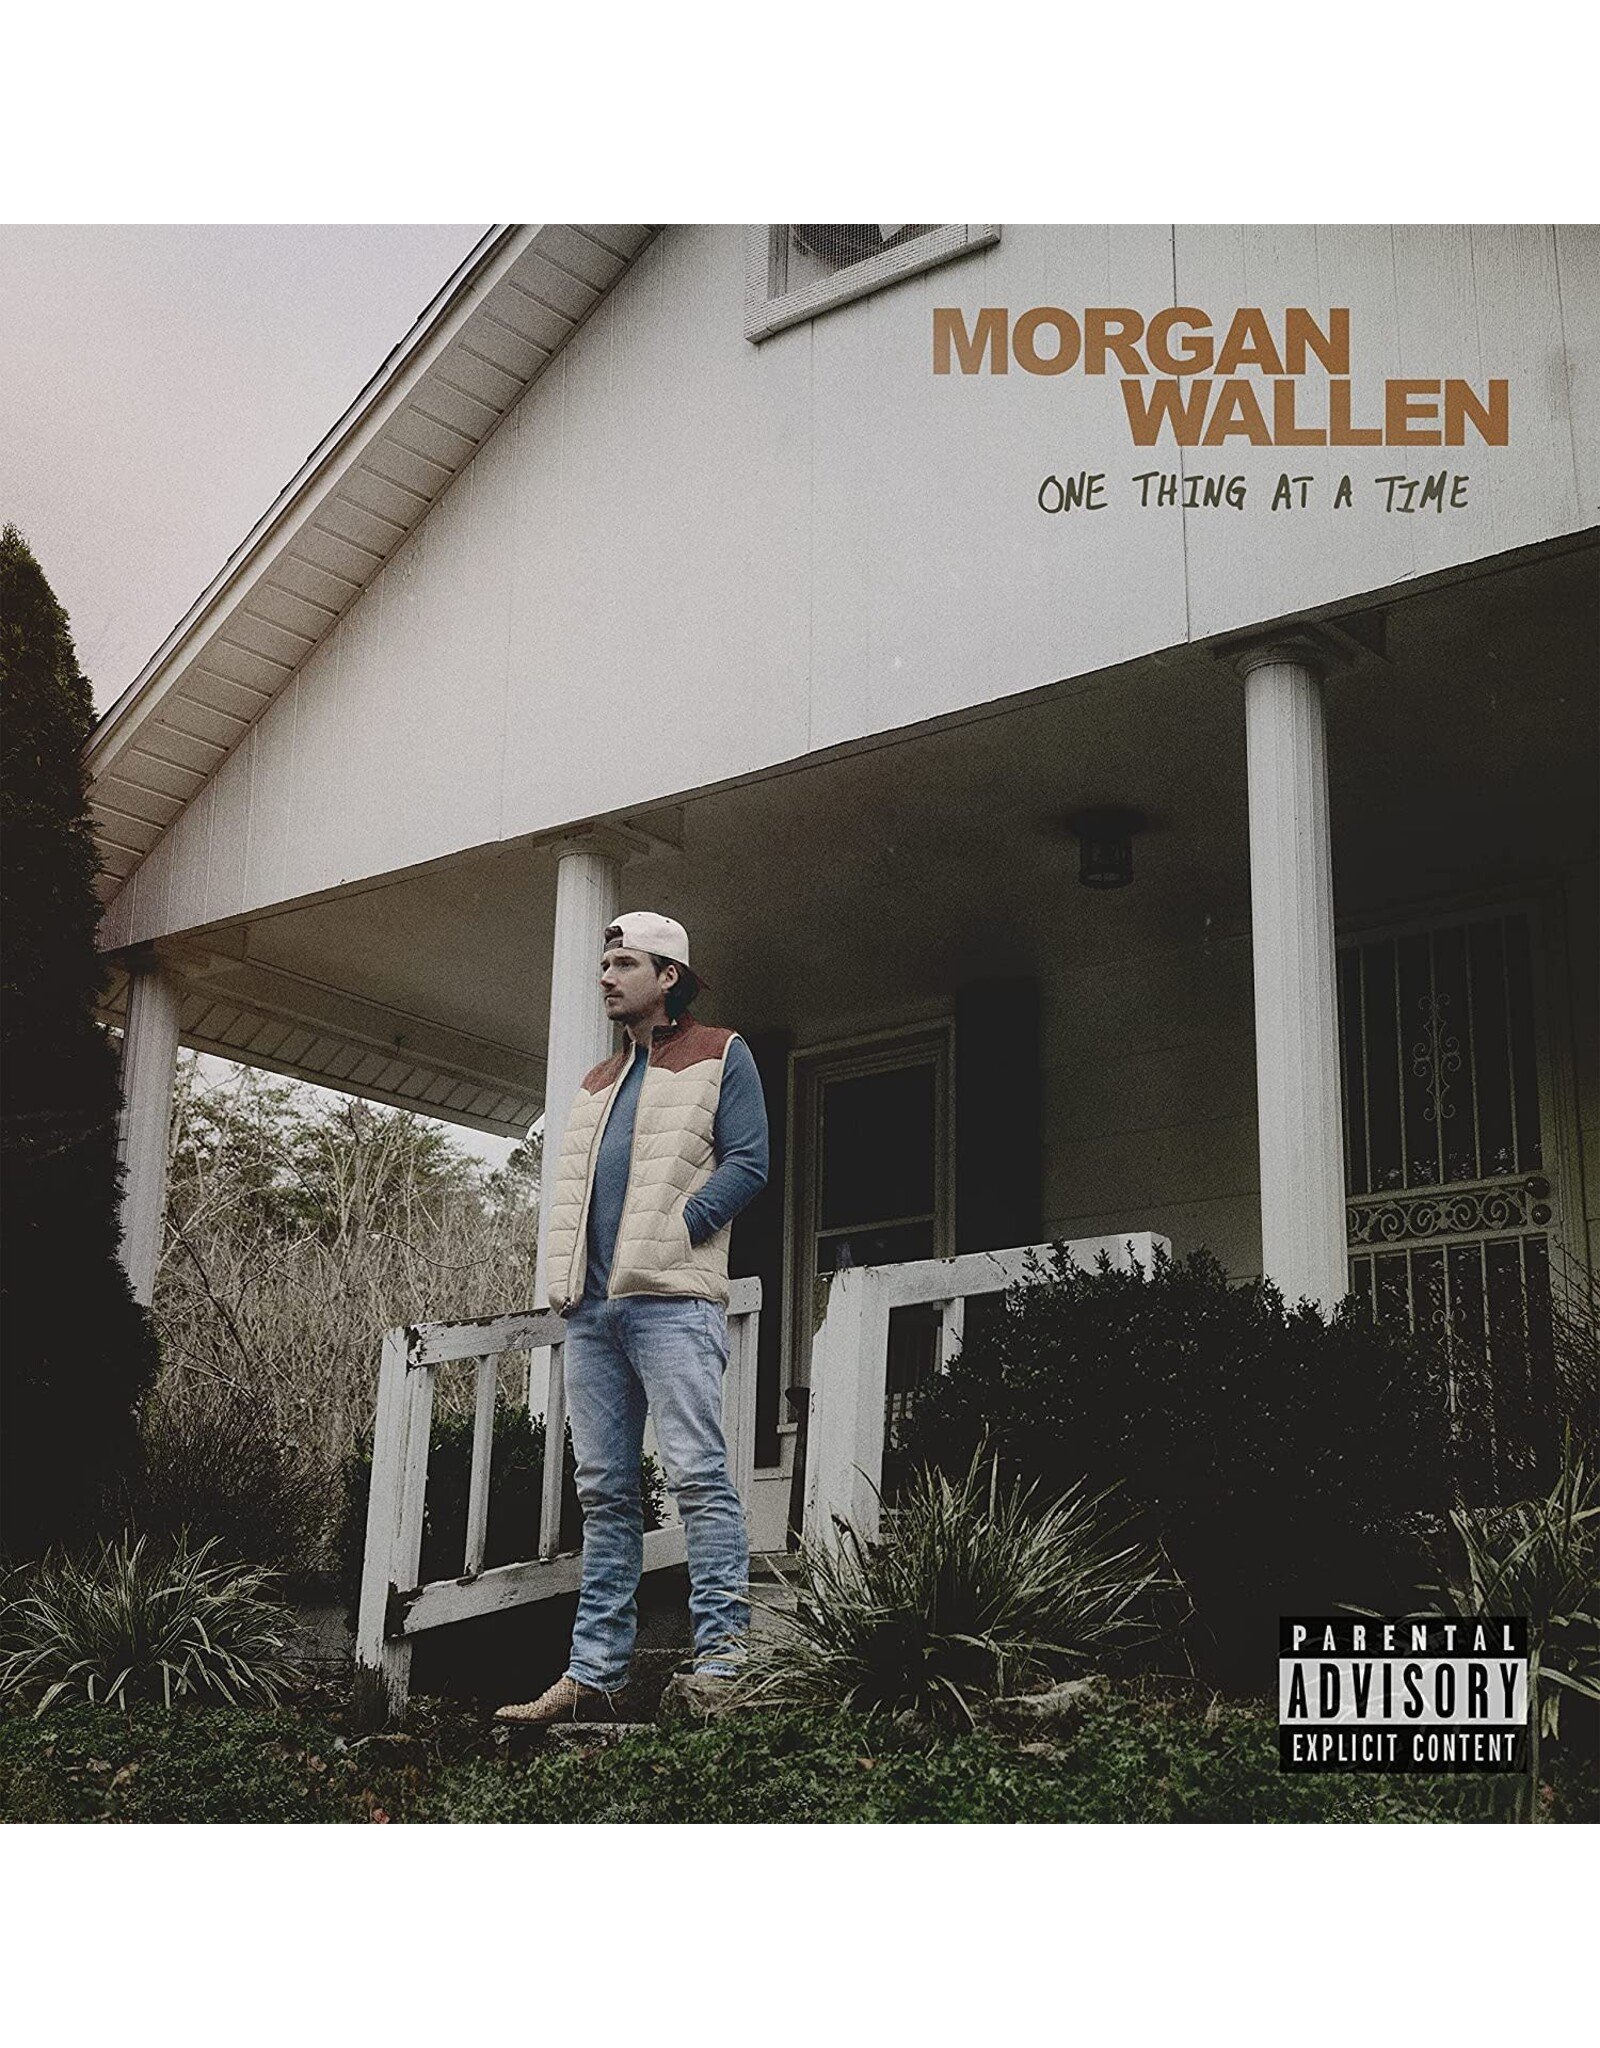 Morgan Wallen One Thing At A Time (3枚組アナログレコード) - レコード